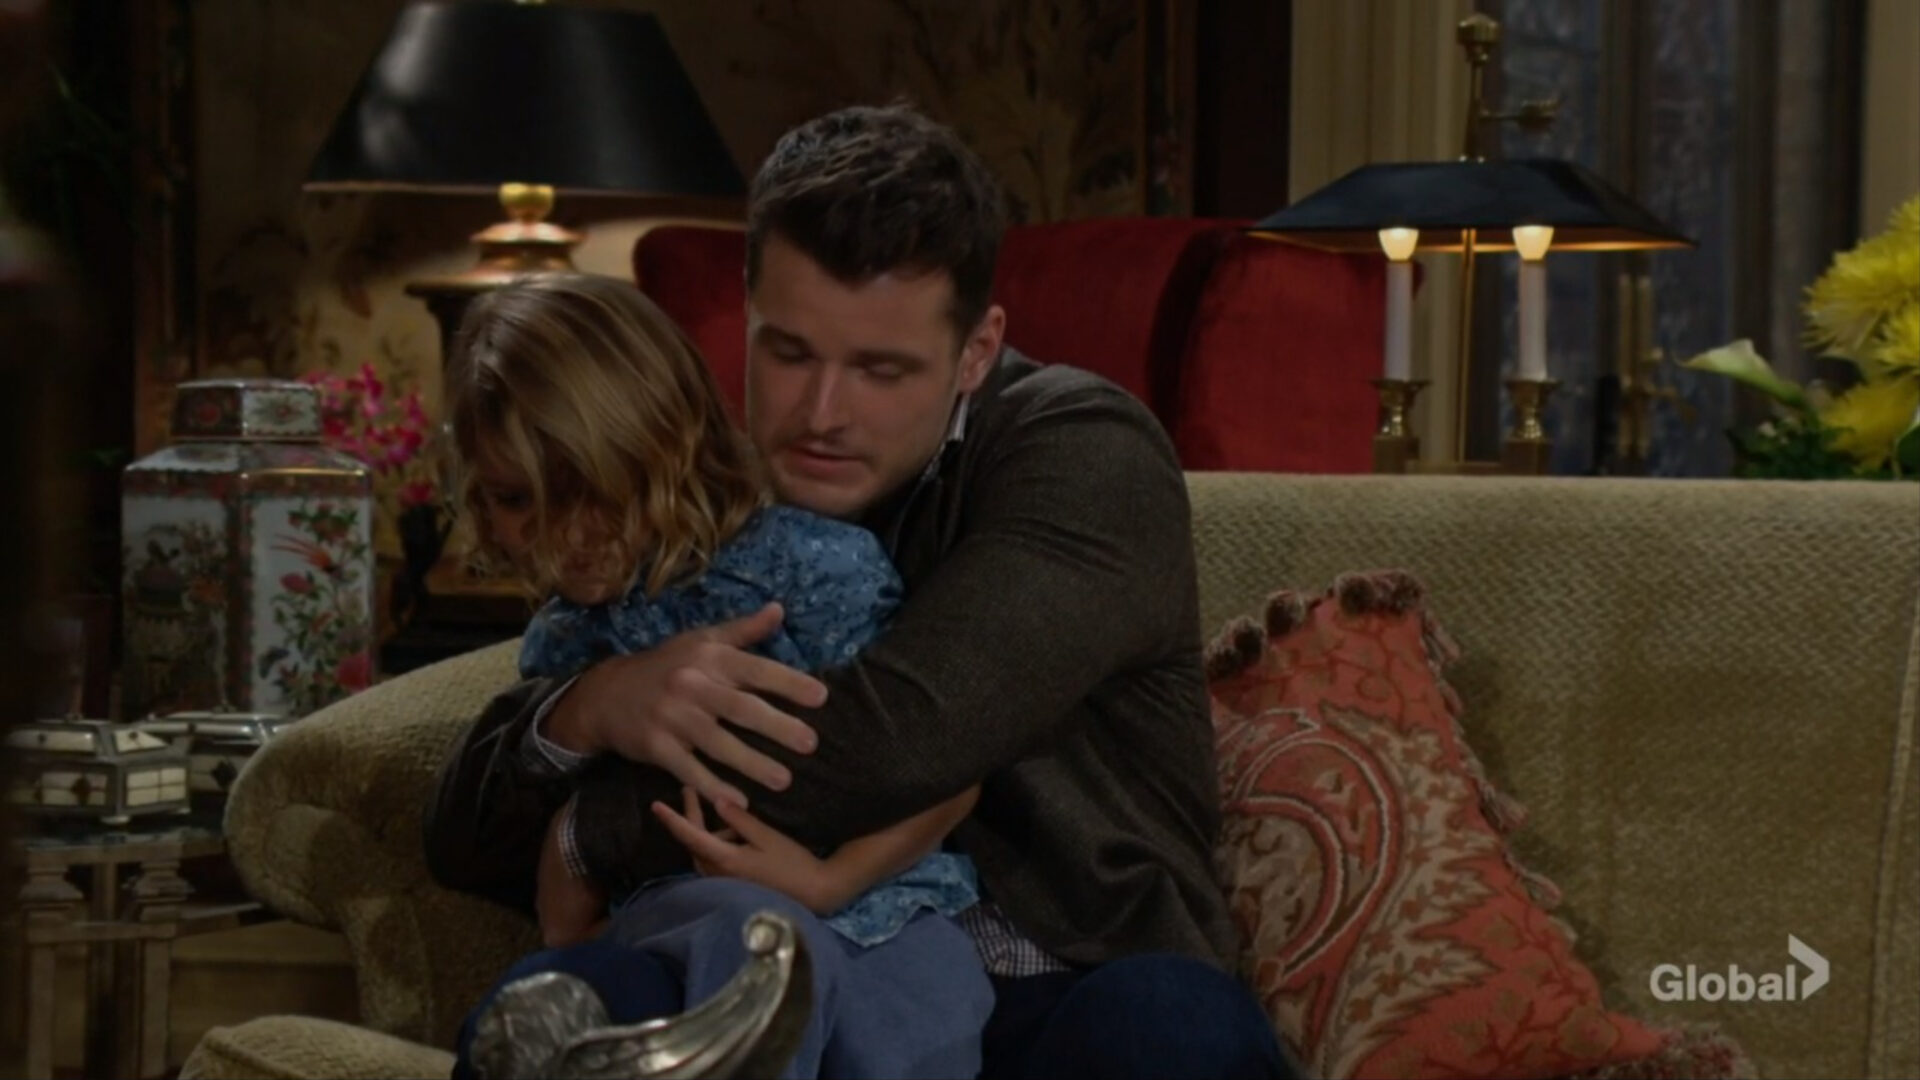 kyle snuggles harrison young and restless